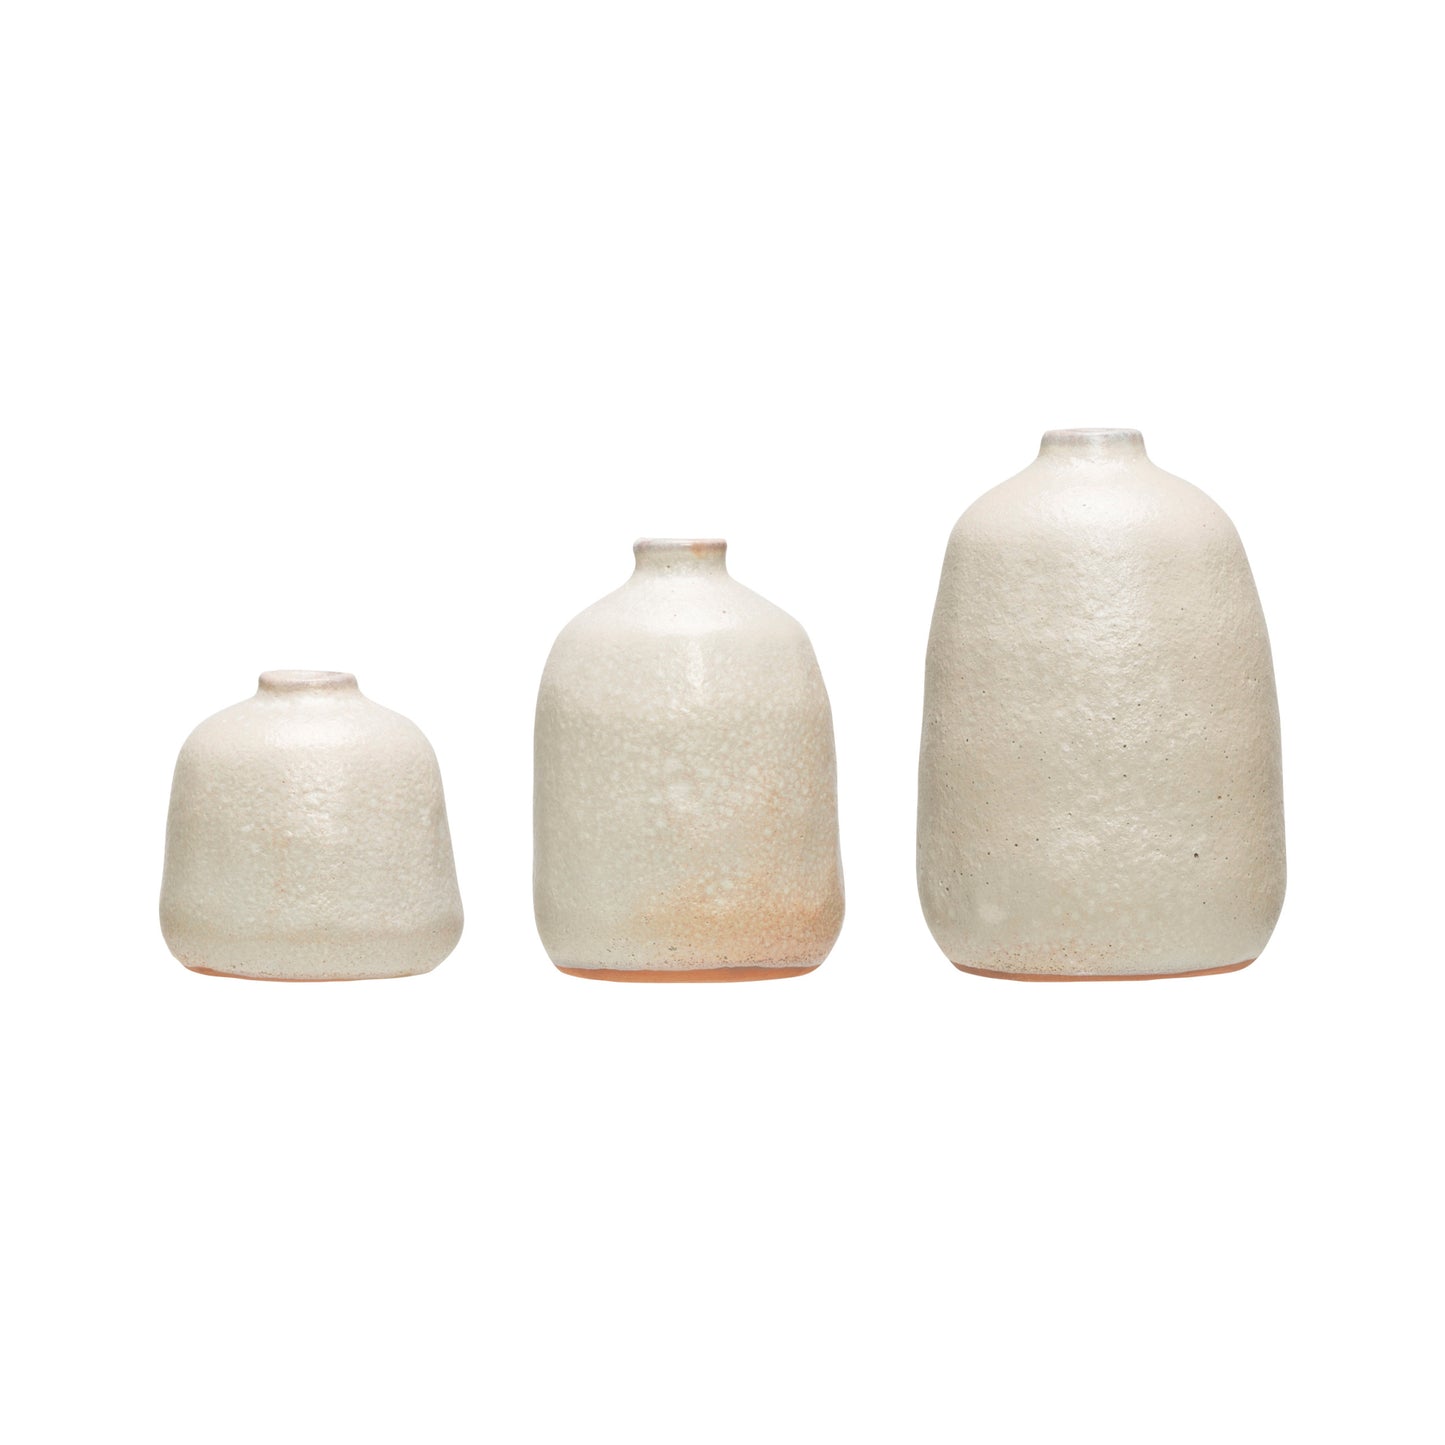 Terracotta Vases with Sand Finish